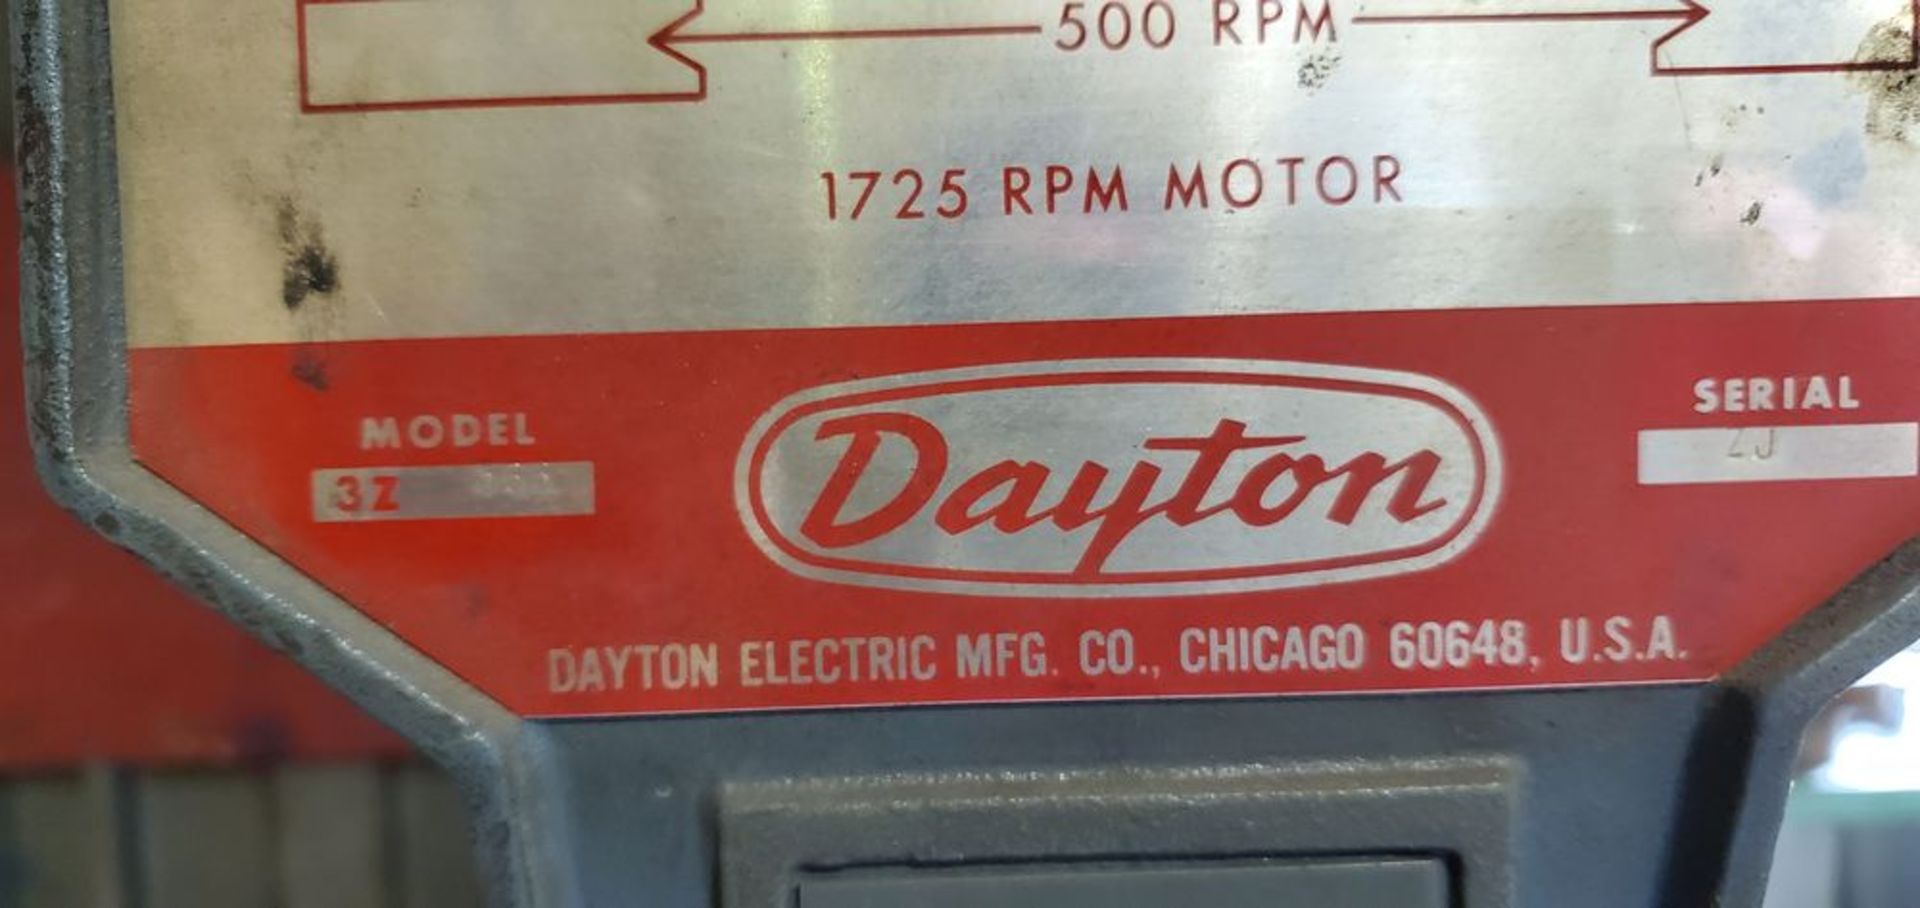 Located in Canon City, CO -- Dayton Drill Press MDL#32566 3/4hp 1/2" chuck, in operation $100 - Image 3 of 4